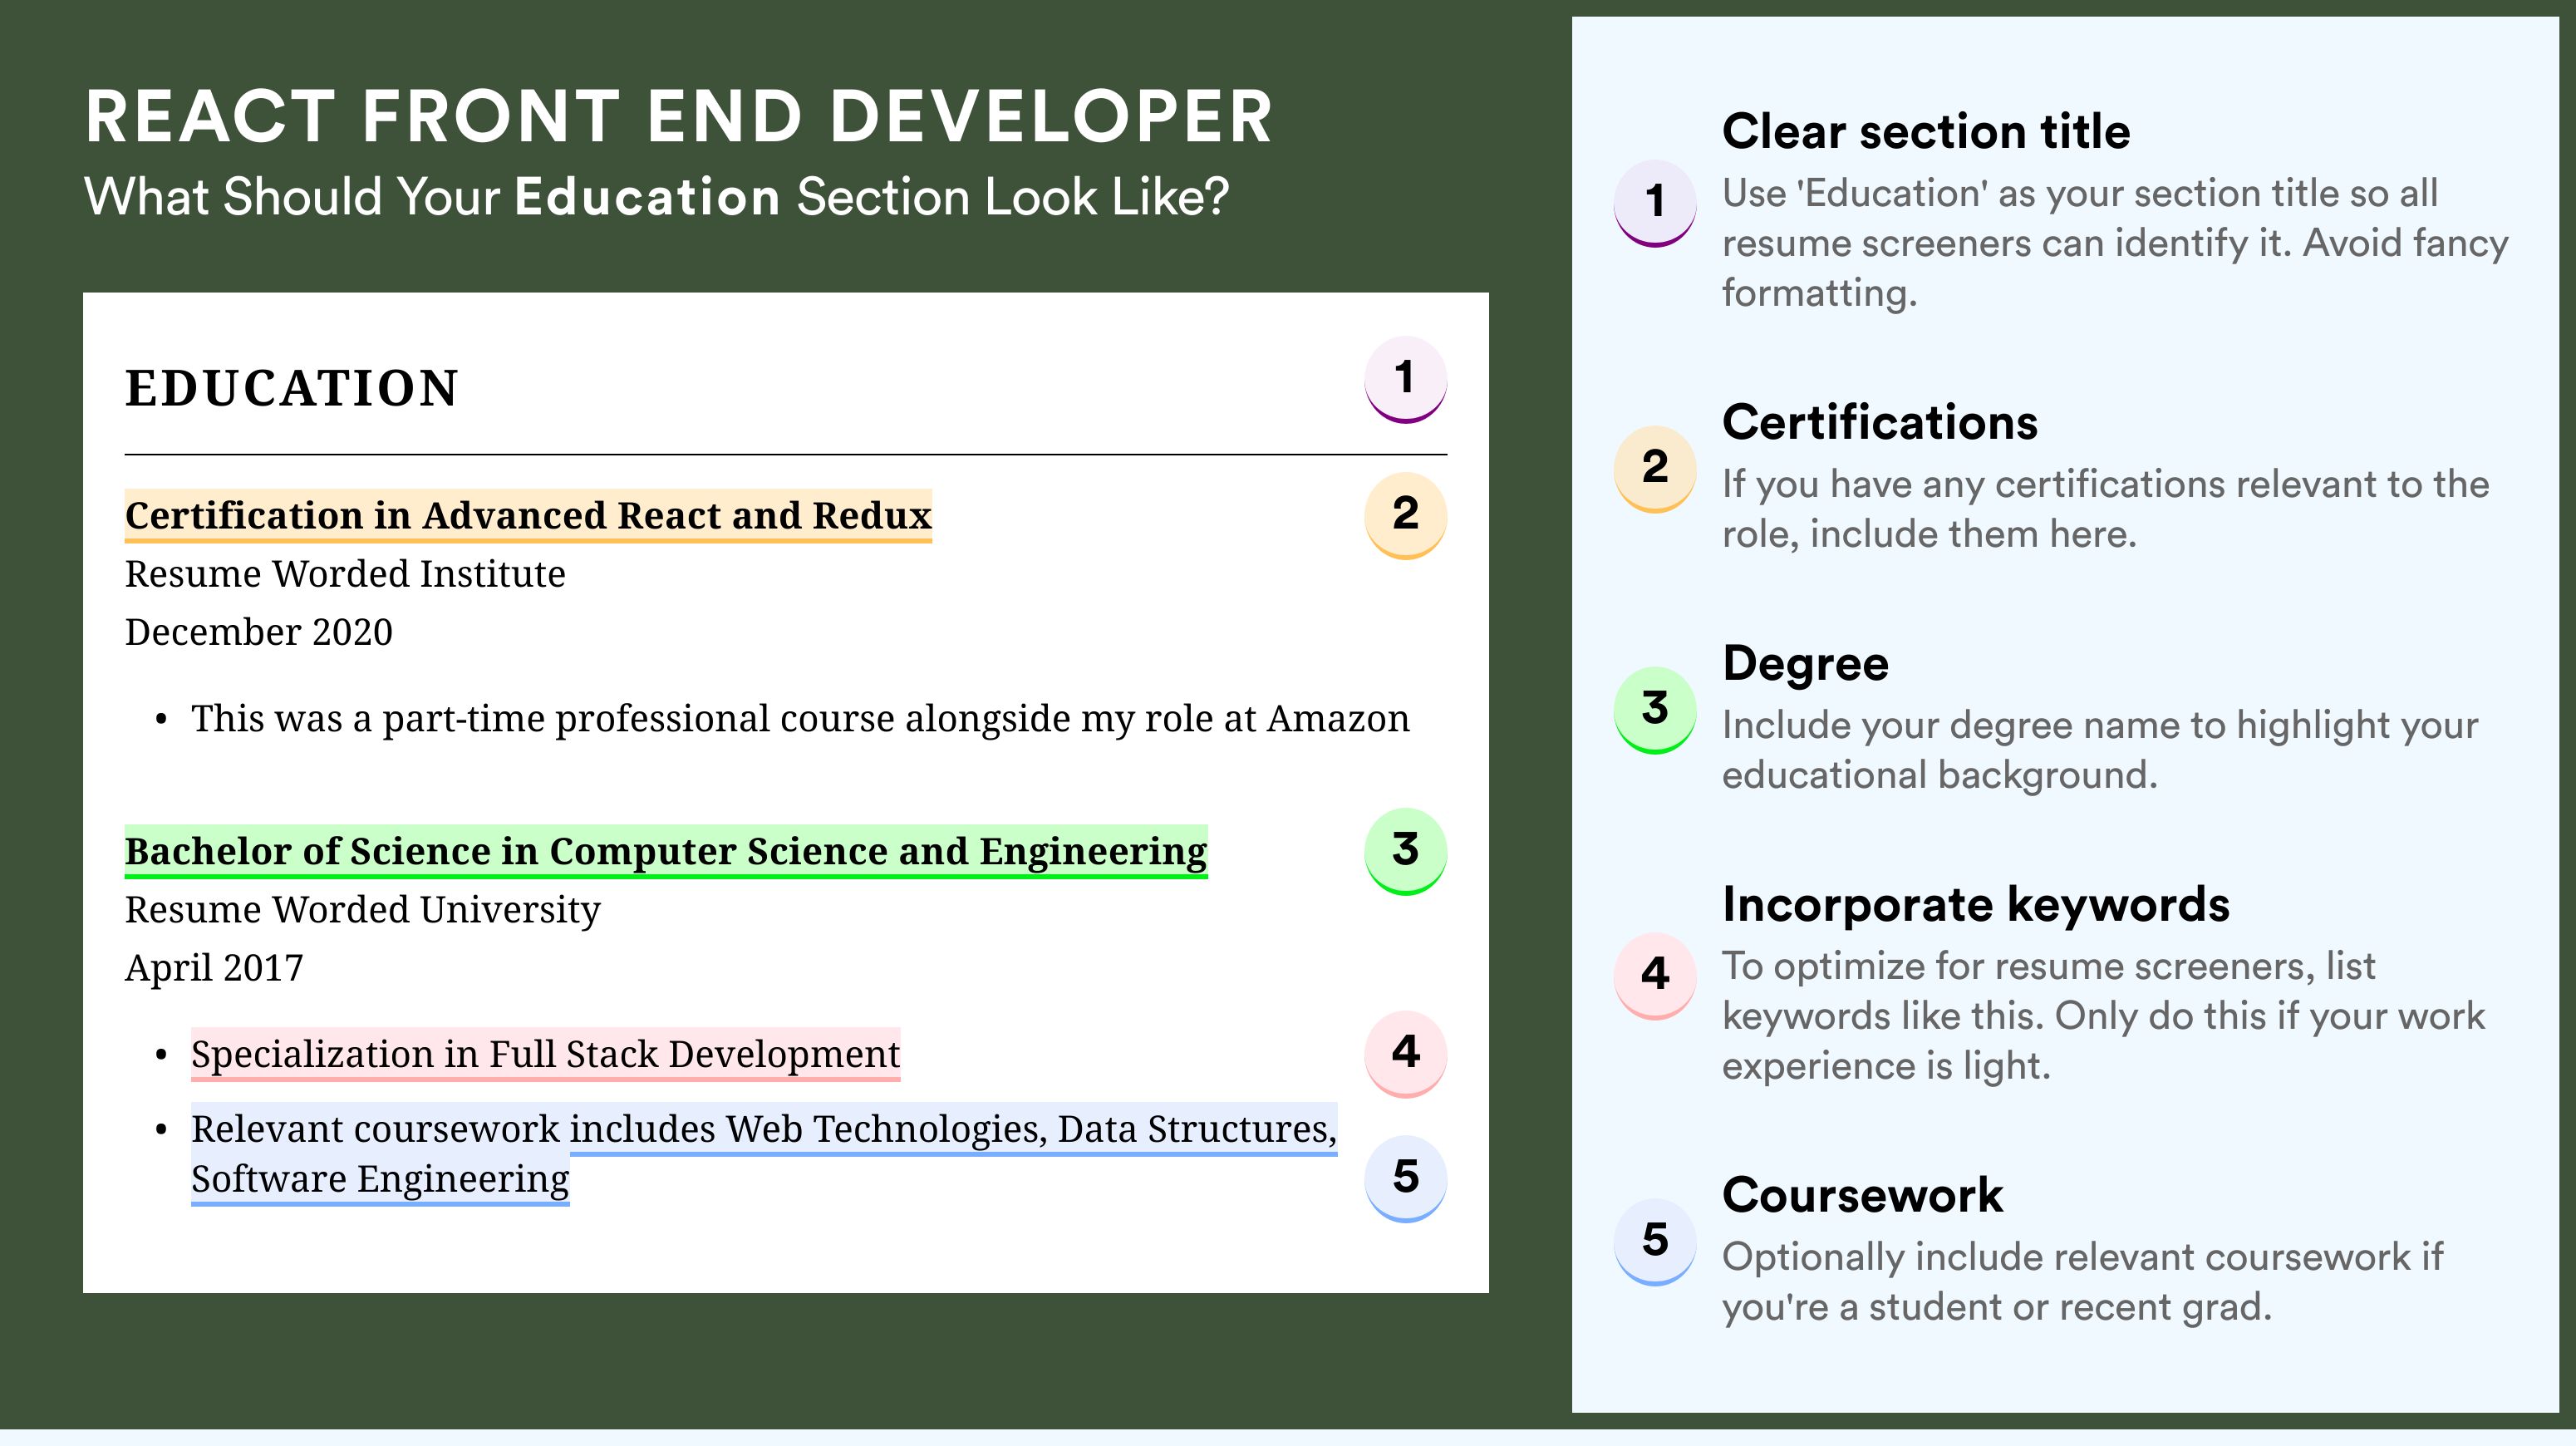 How To Write An Education Section - React Front End Developer Roles